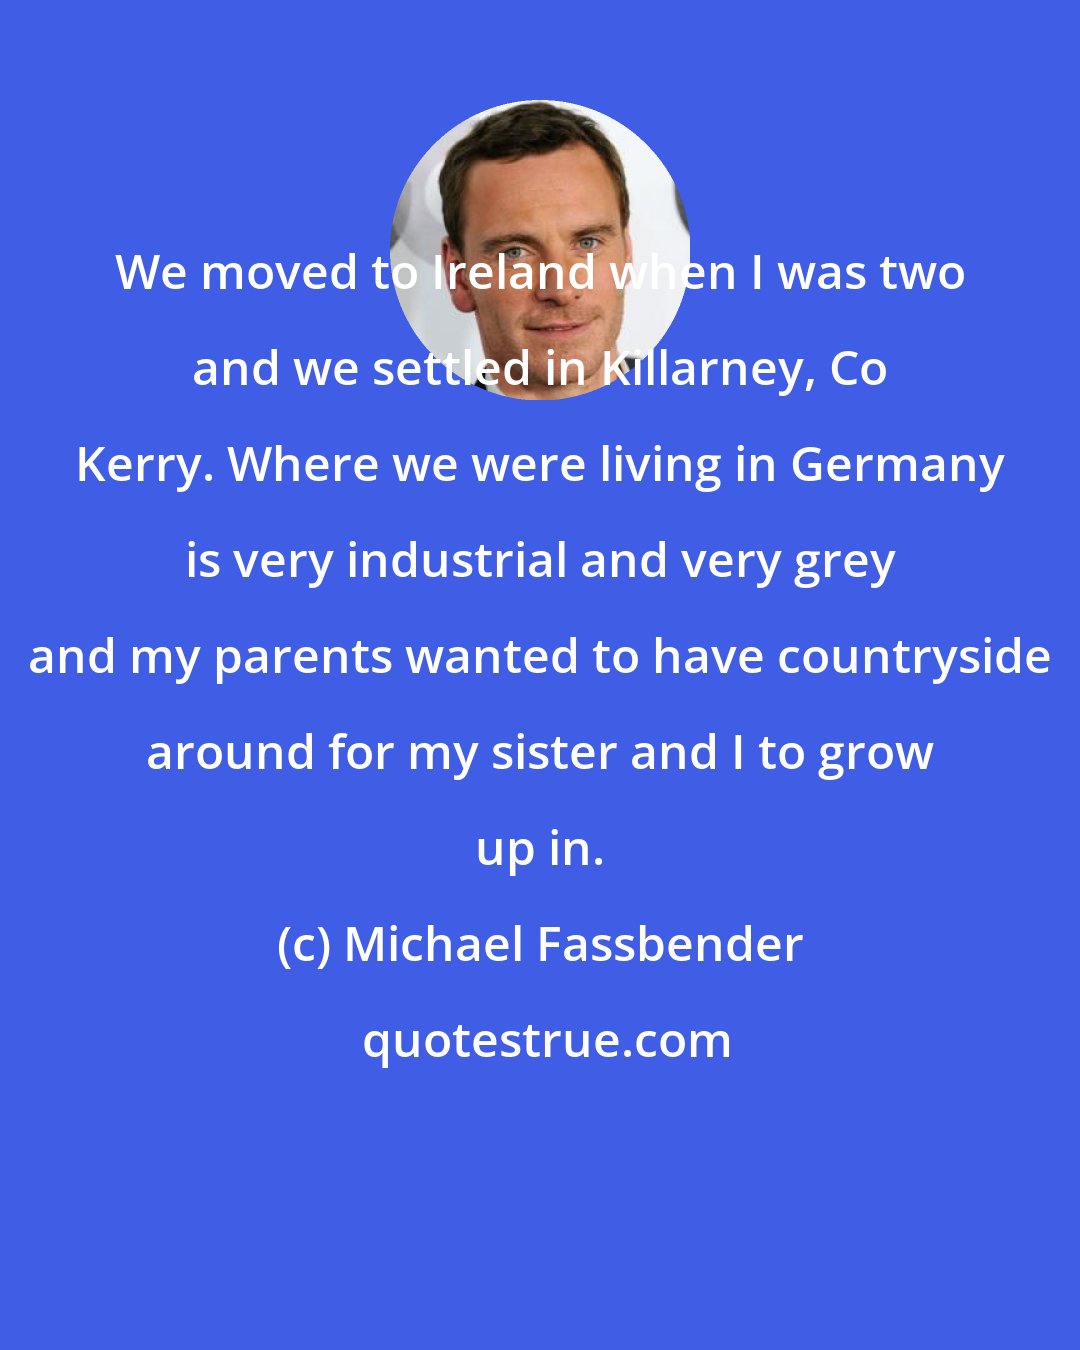 Michael Fassbender: We moved to Ireland when I was two and we settled in Killarney, Co Kerry. Where we were living in Germany is very industrial and very grey and my parents wanted to have countryside around for my sister and I to grow up in.